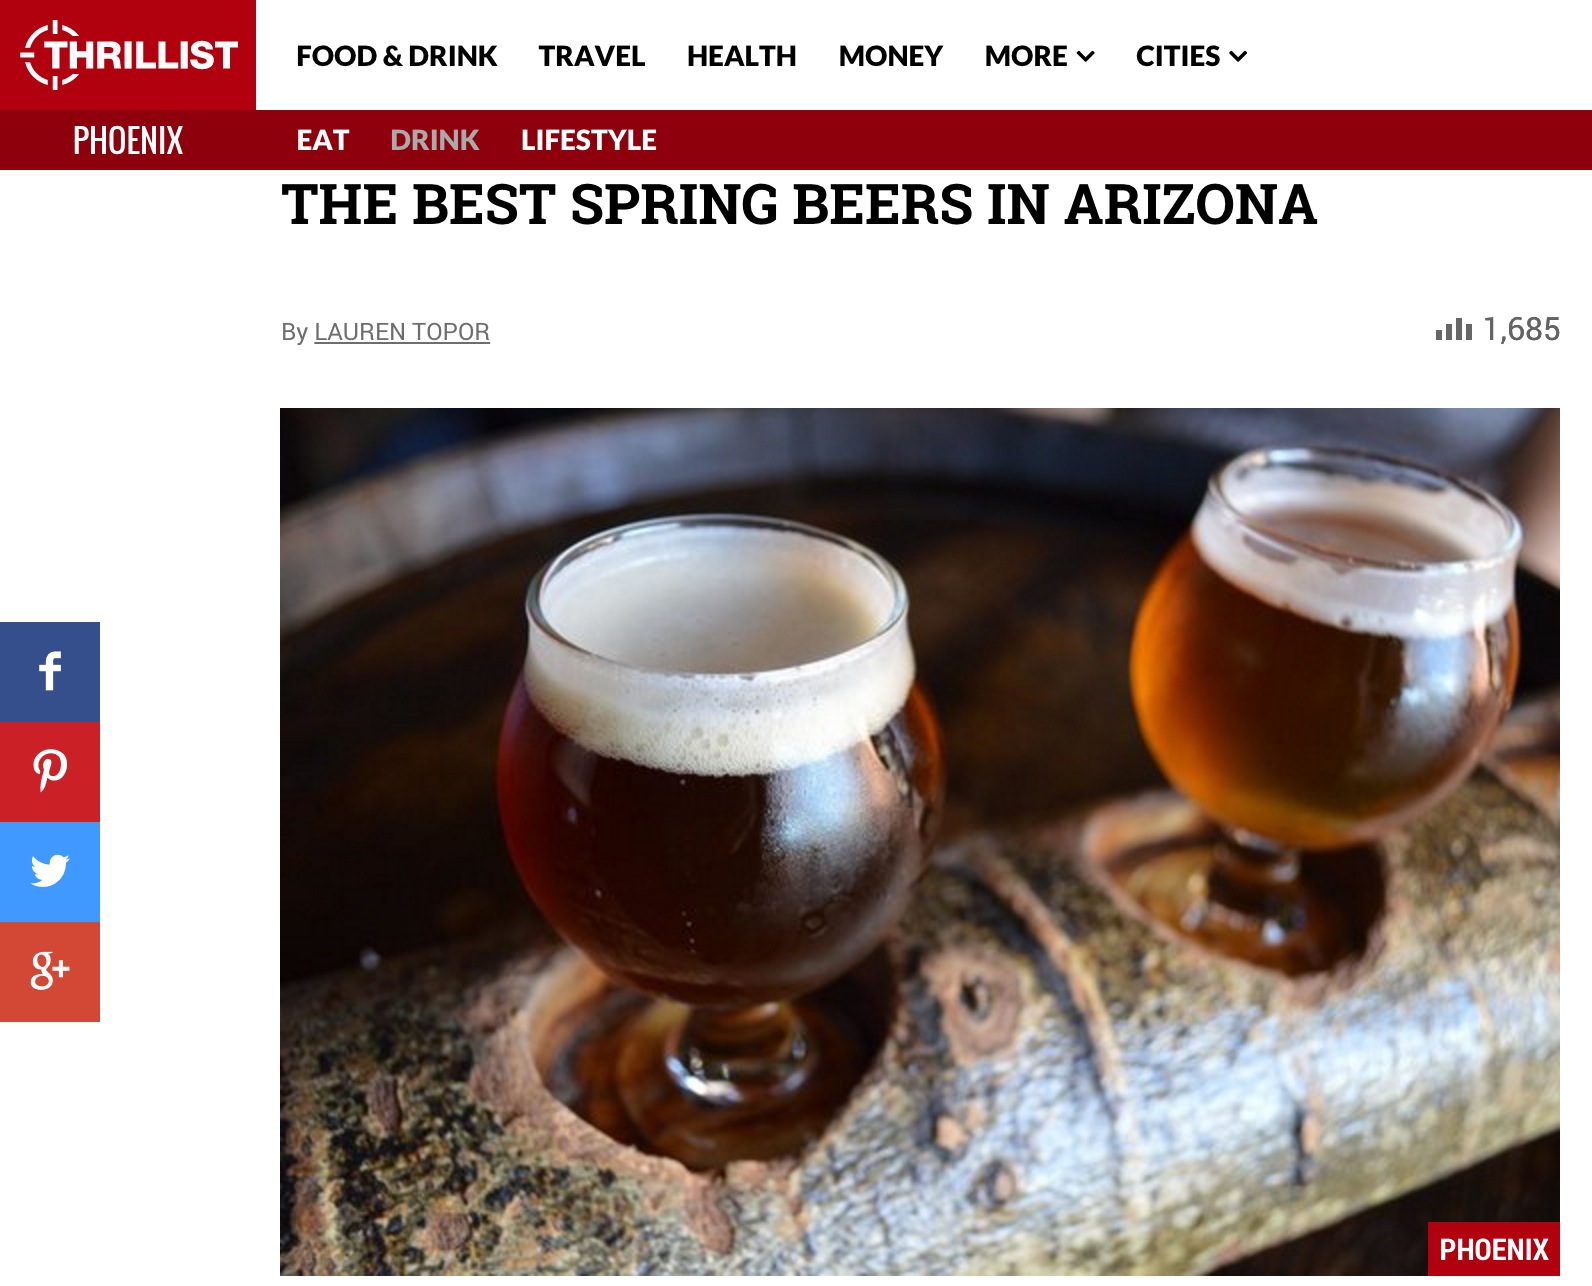 Thrillist Cites THAT Strawberry Blonde Among Best Of Spring Beers